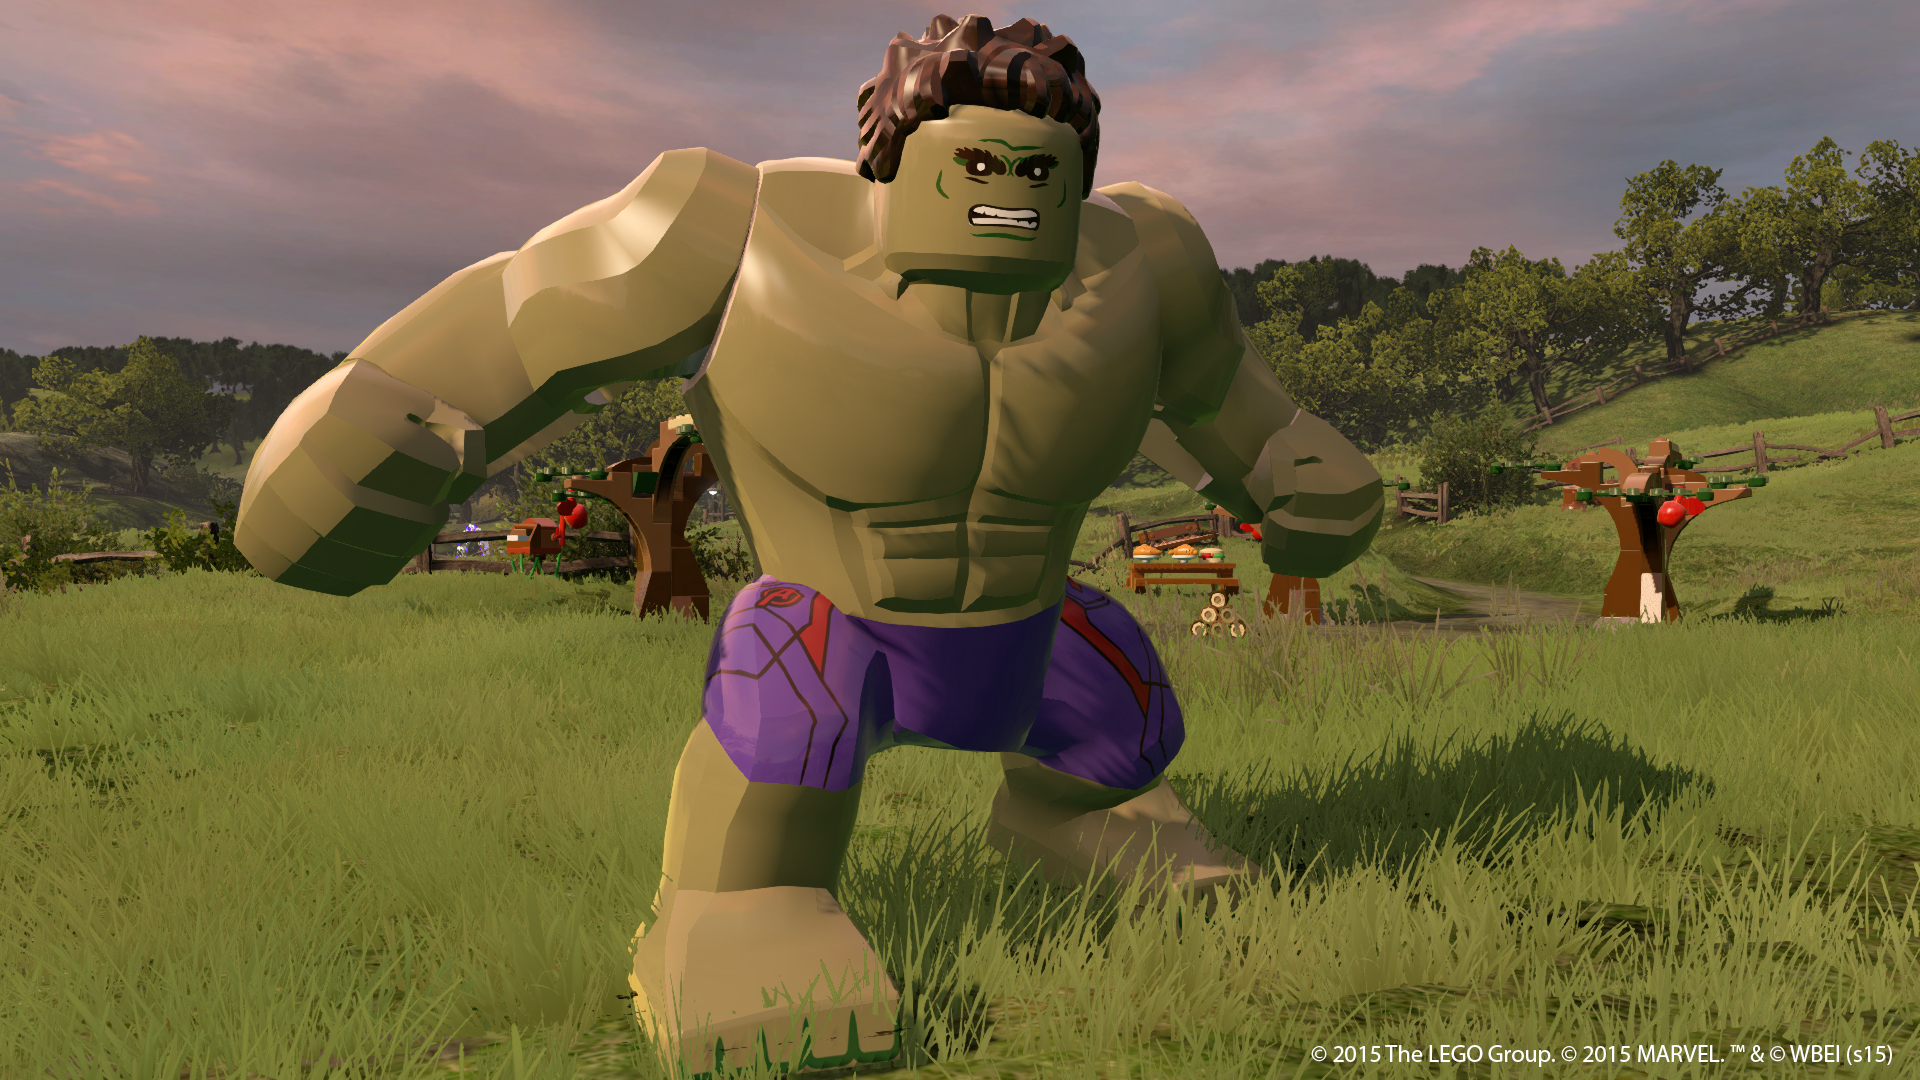 Lego Marvel Avengers Cheat Codes For 10 X 2 Studs - HD Wallpaper 